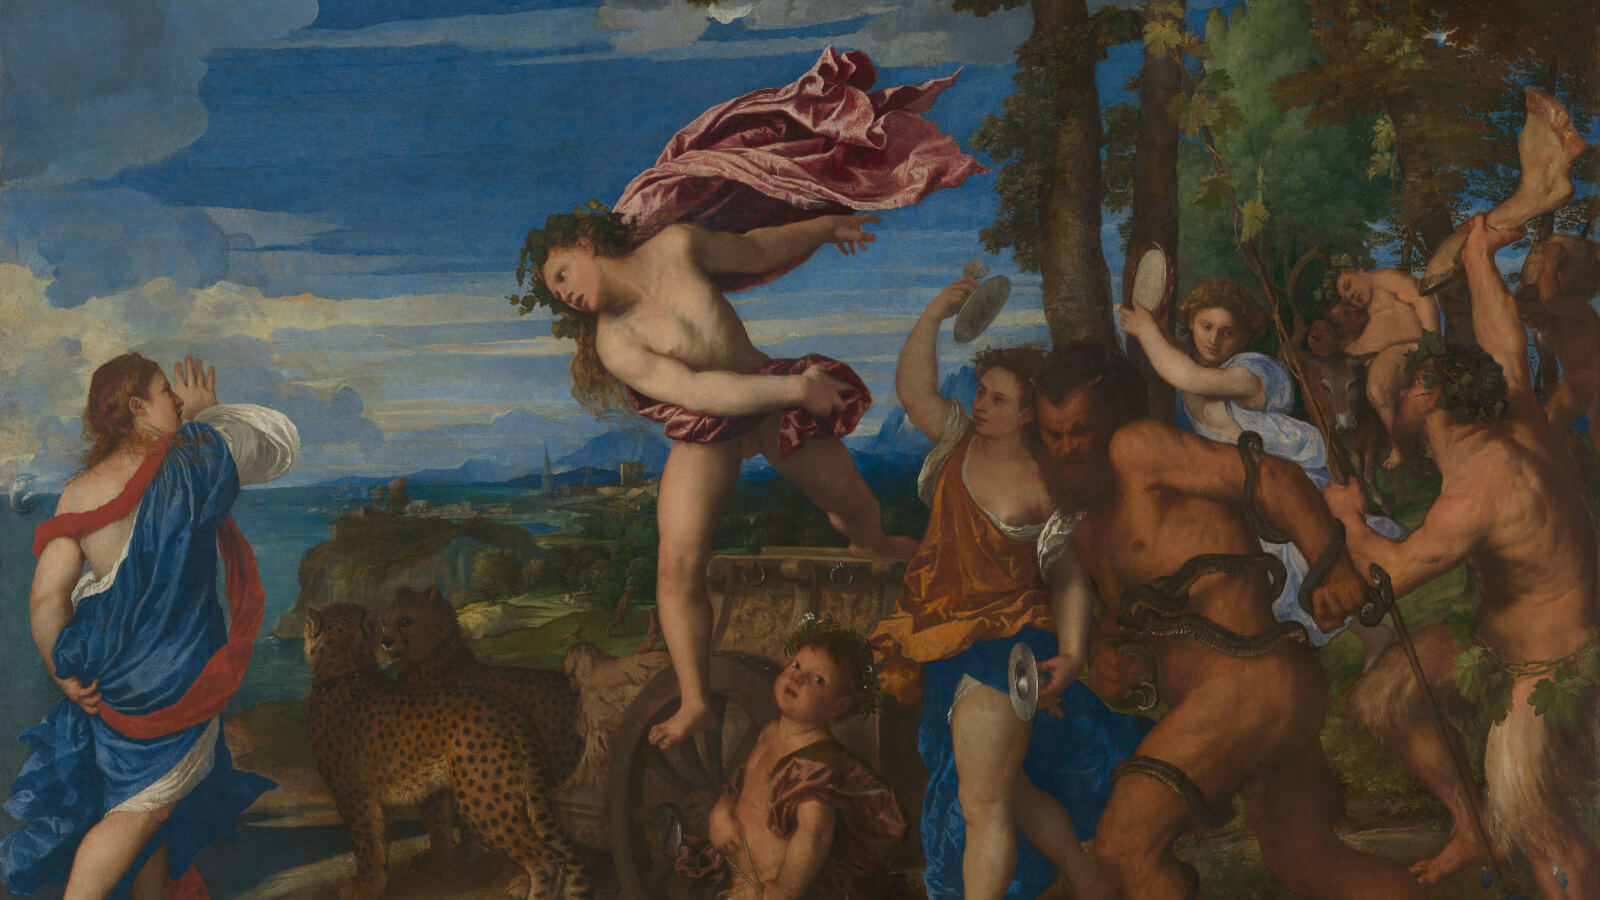 Titian, Bacchus and Ariadne, 1520-23, National Gallery, London, UK. Detail.